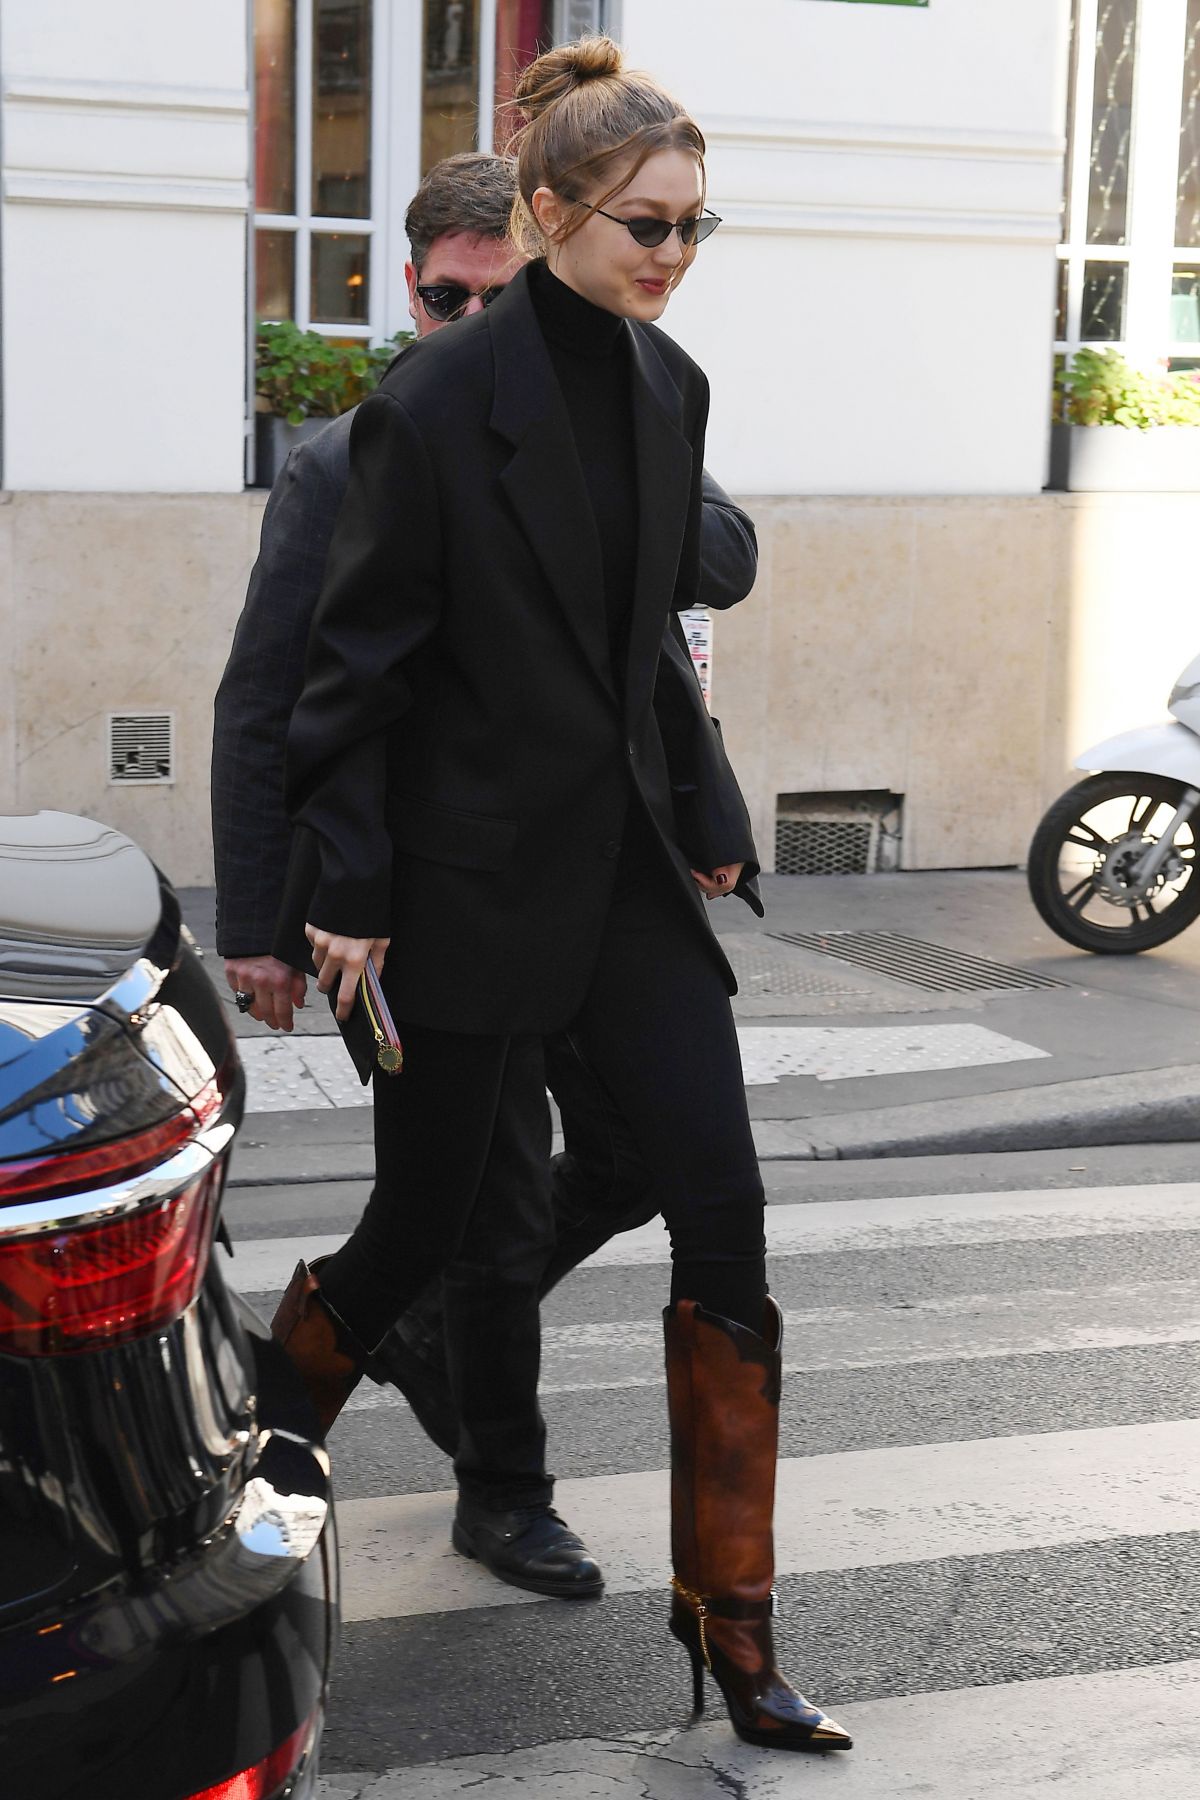 gigi-hadid-out-and-about-in-paris-02-26-2019-2.jpg